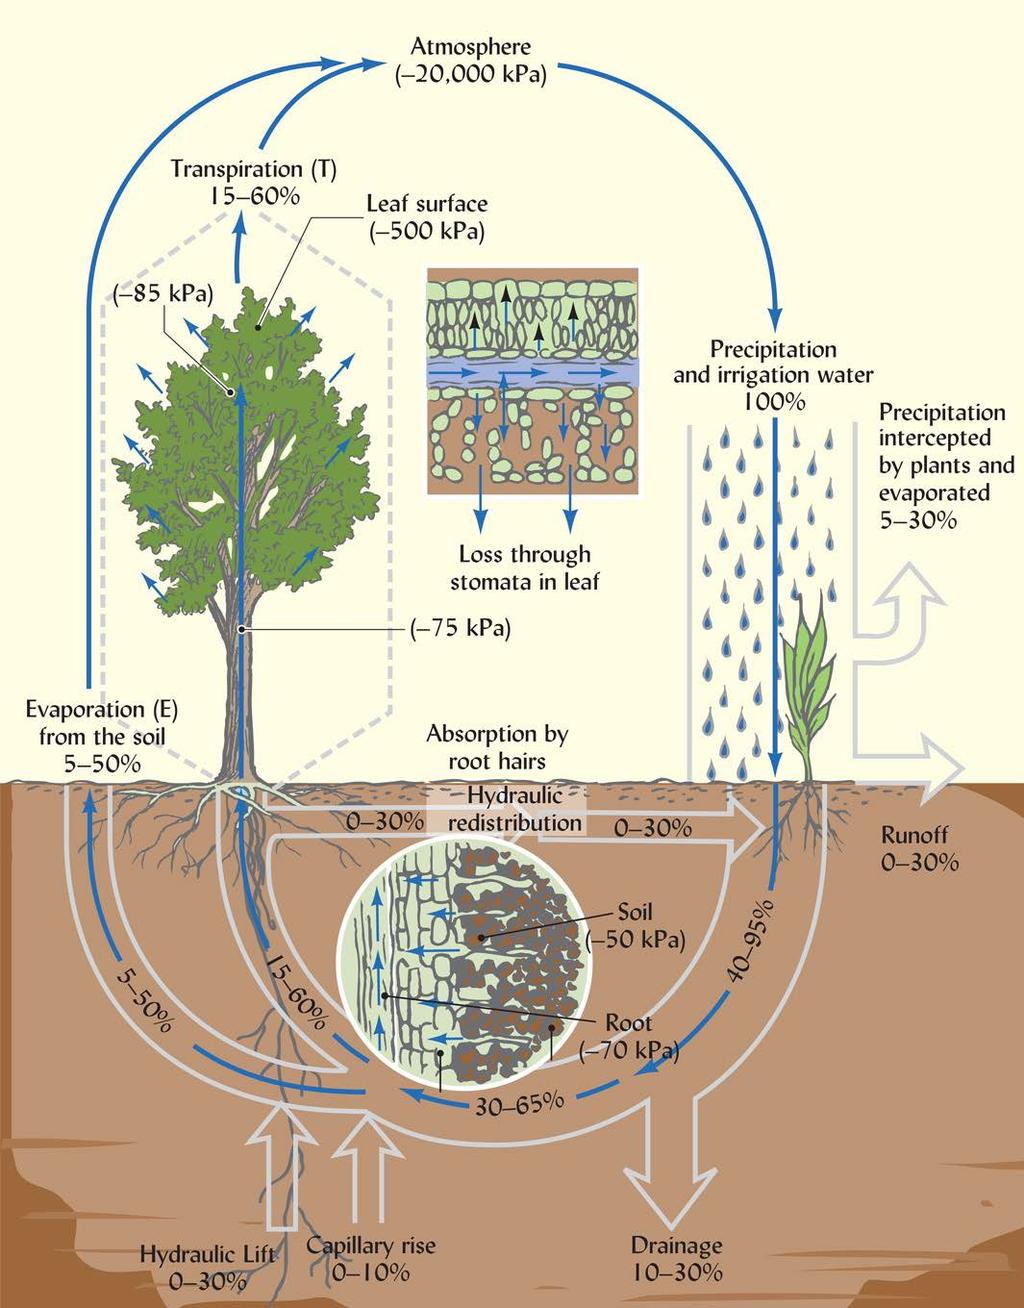 Soil Storage Infiltration Runoff + Drainage = Discharge Water Cycling in Soil-Plant- Atmosphere Systems 5-30% of rain is intercepted 0-30%